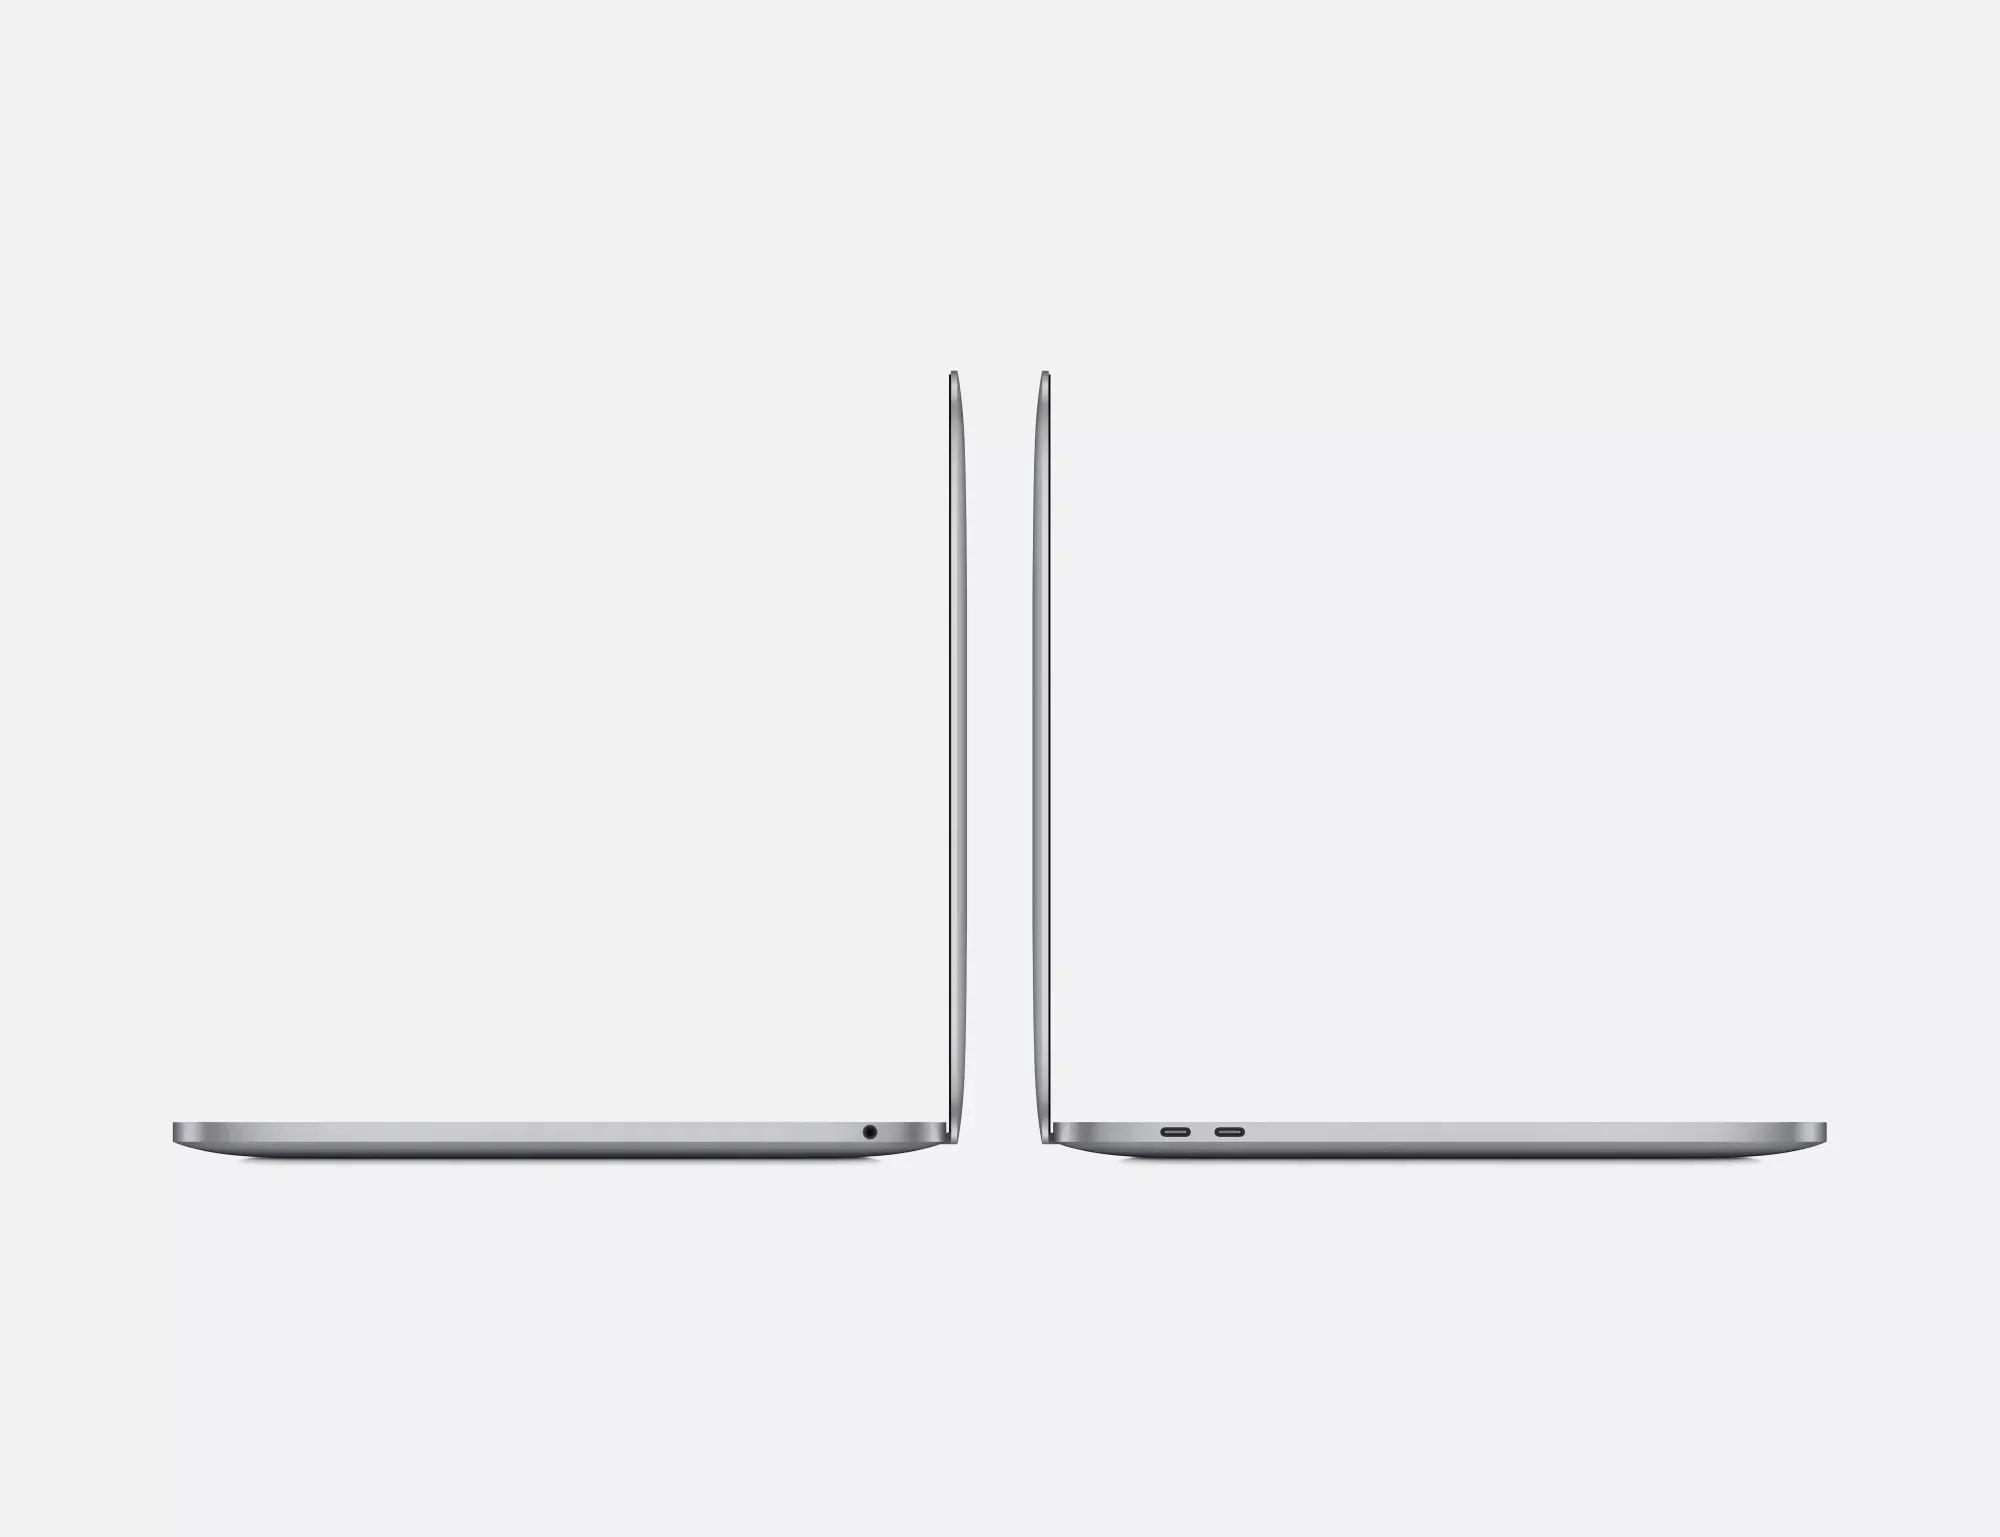 Apple M1 MacBook Pro 2020 13.3" display / 8GB RAM / 256GB SSD / Apple M1 Chip / Touch Bar / Touch ID